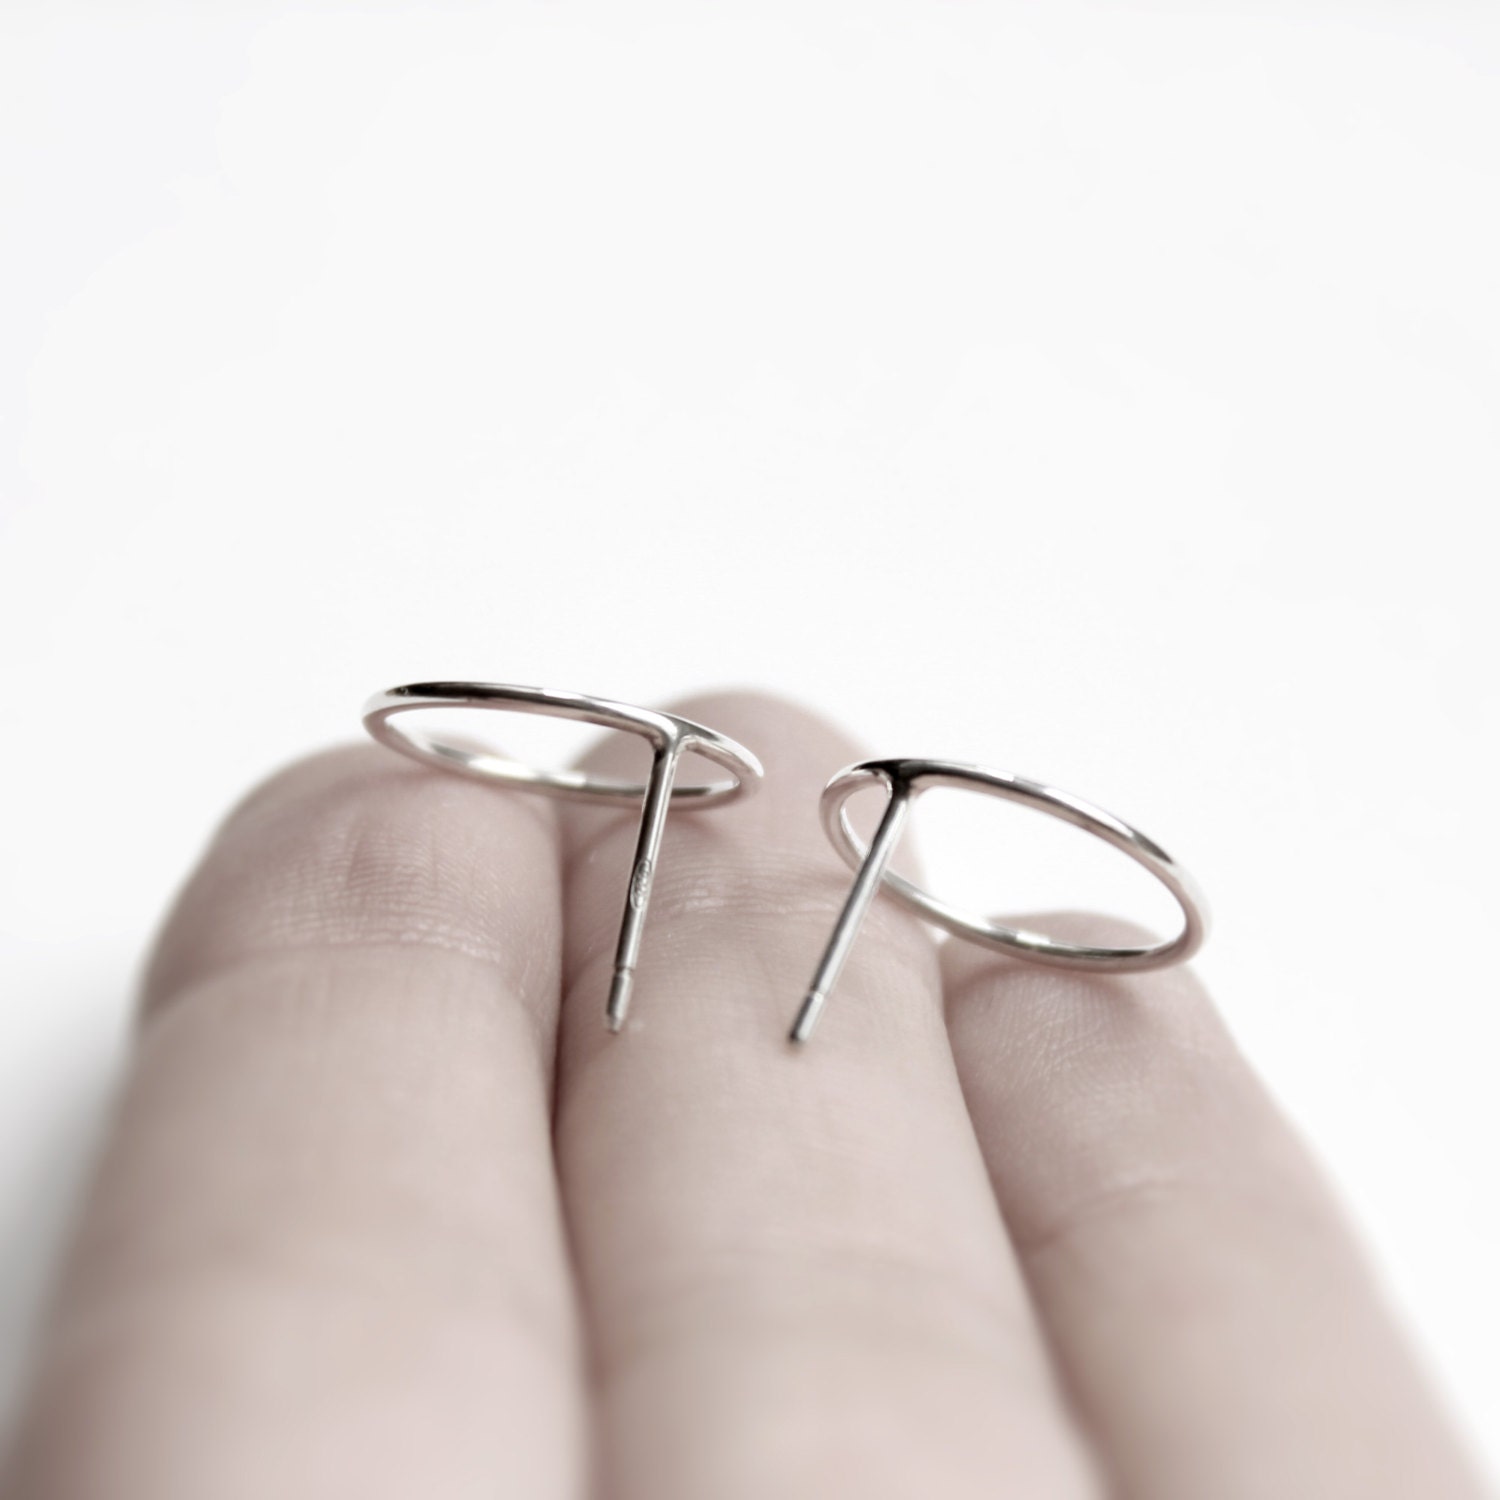 Circles . sterling silver post earrings